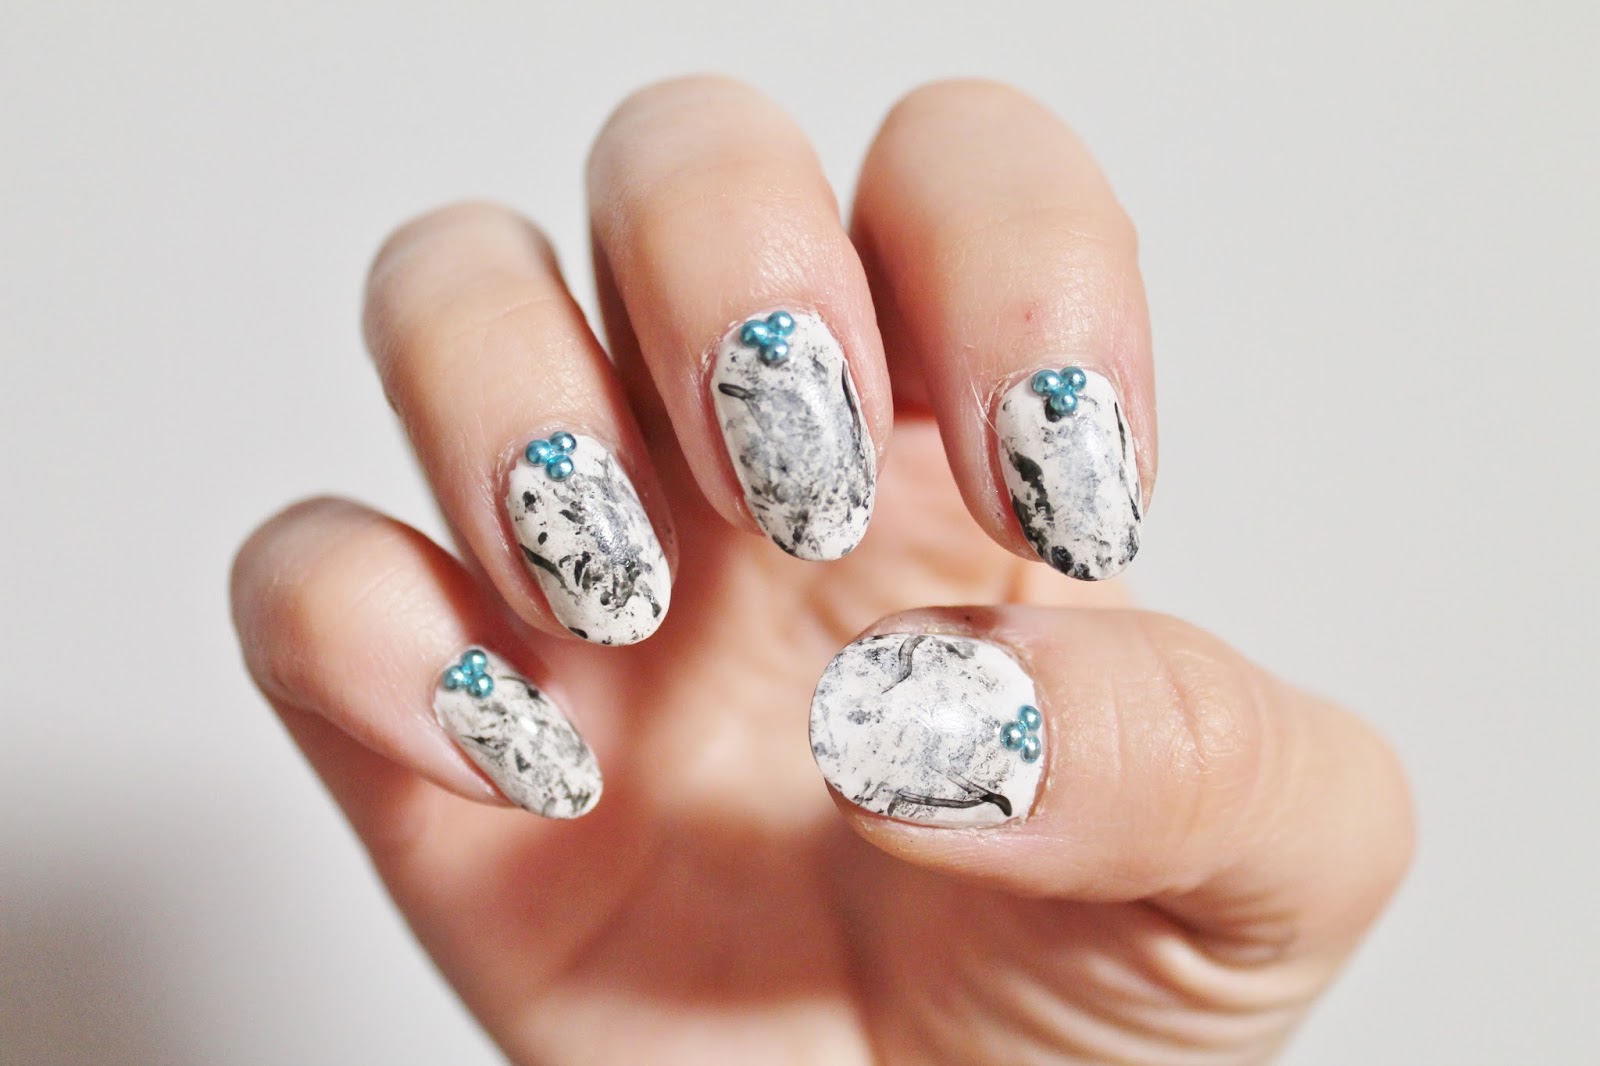 7. Marble Nail Art Tutorial with Gel Polish - wide 8